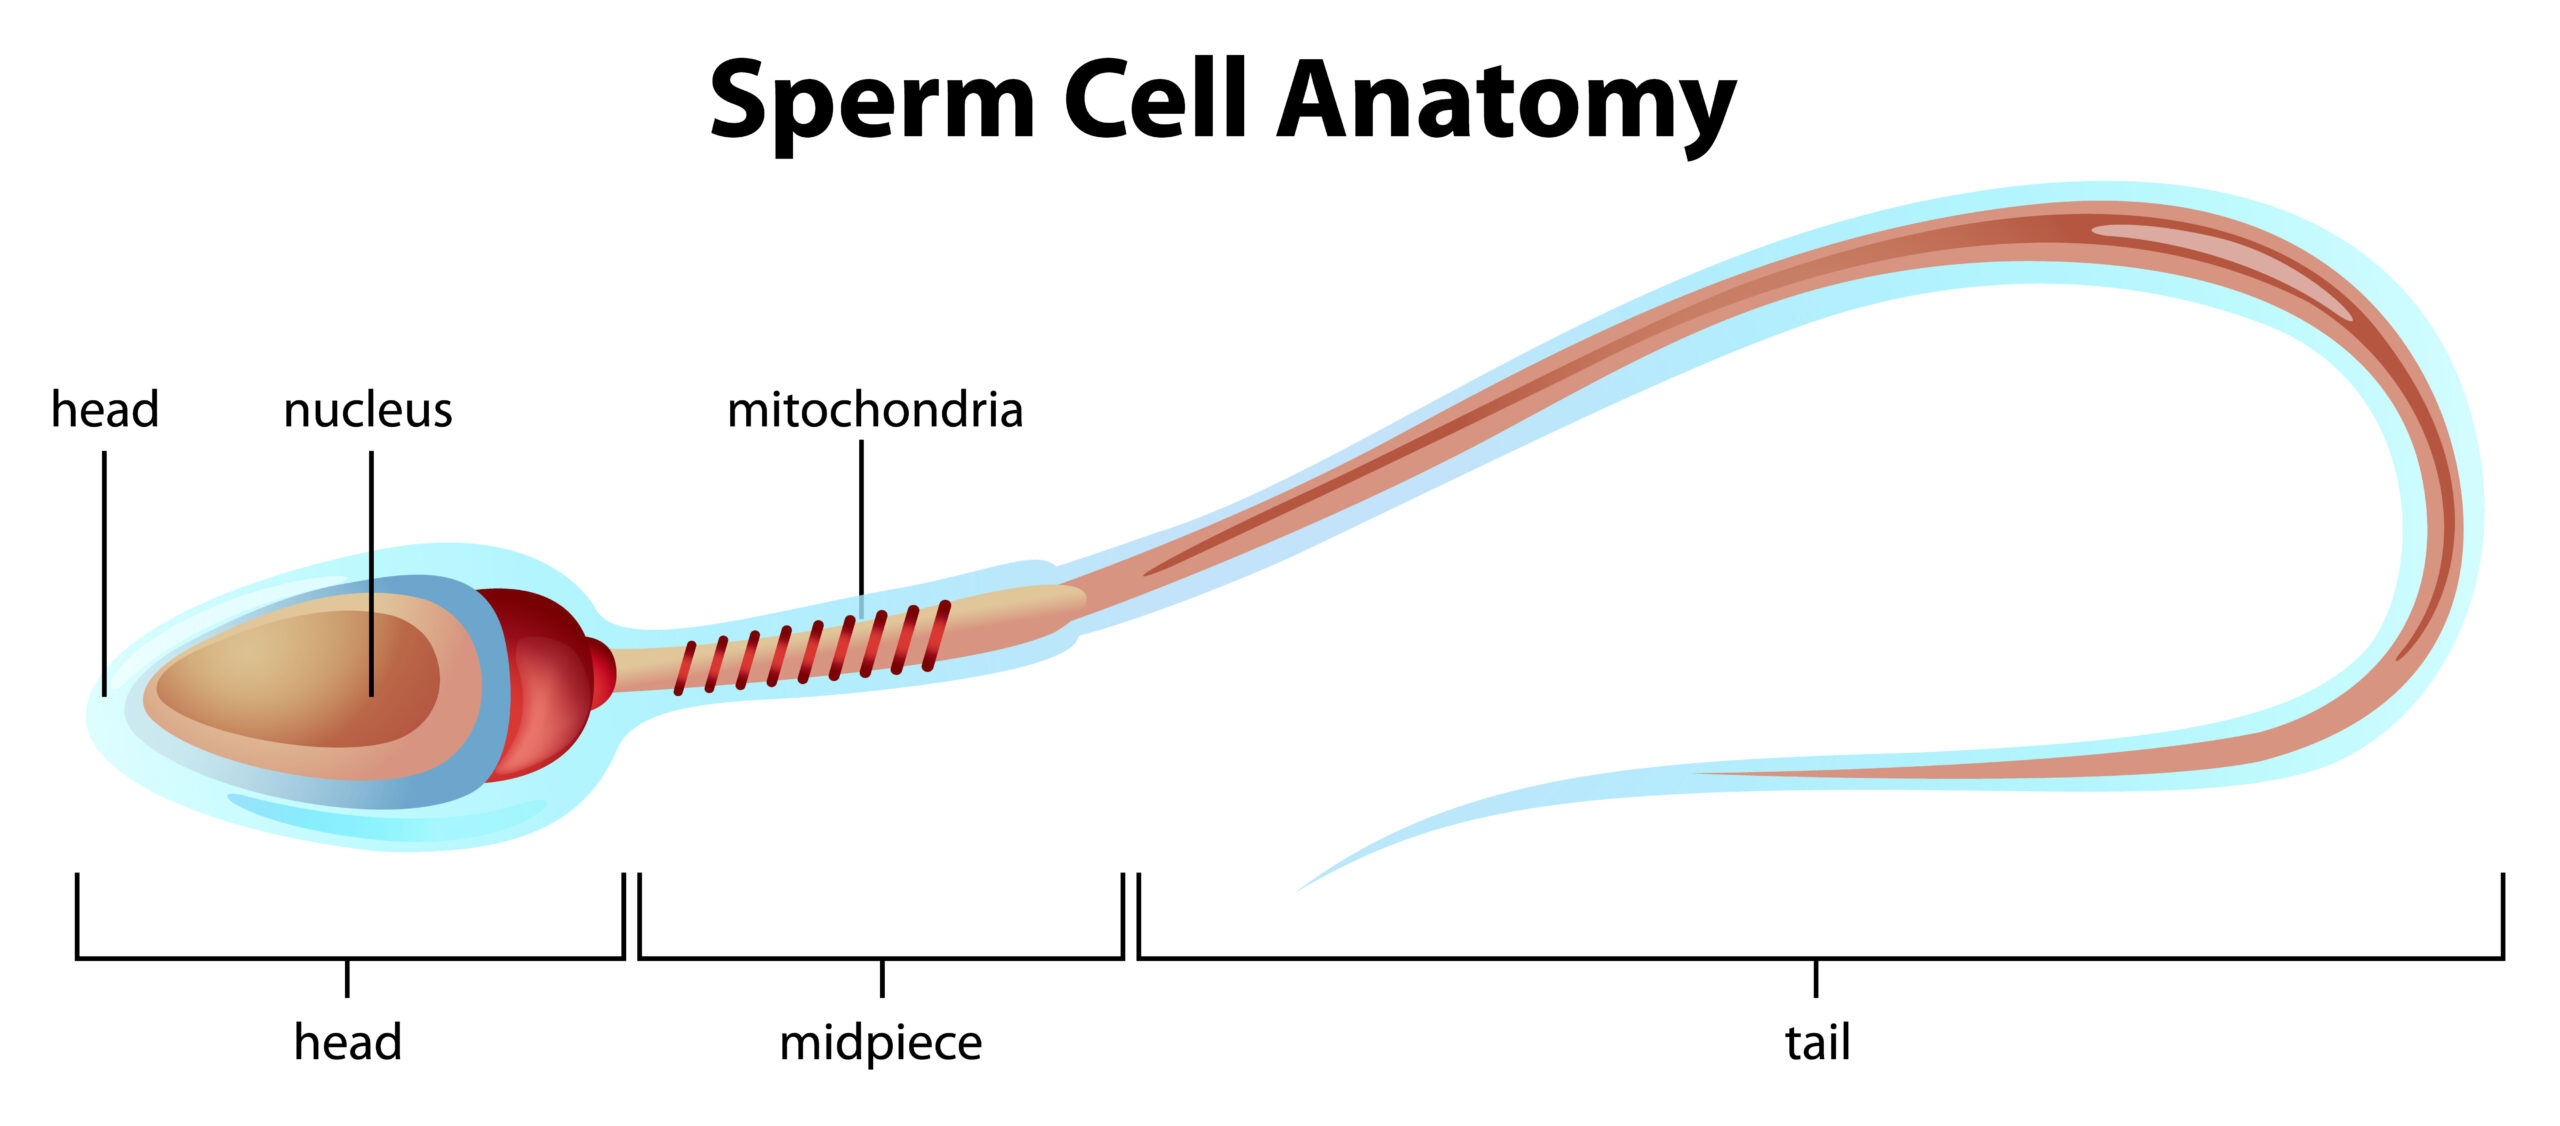 Sperm cell structure